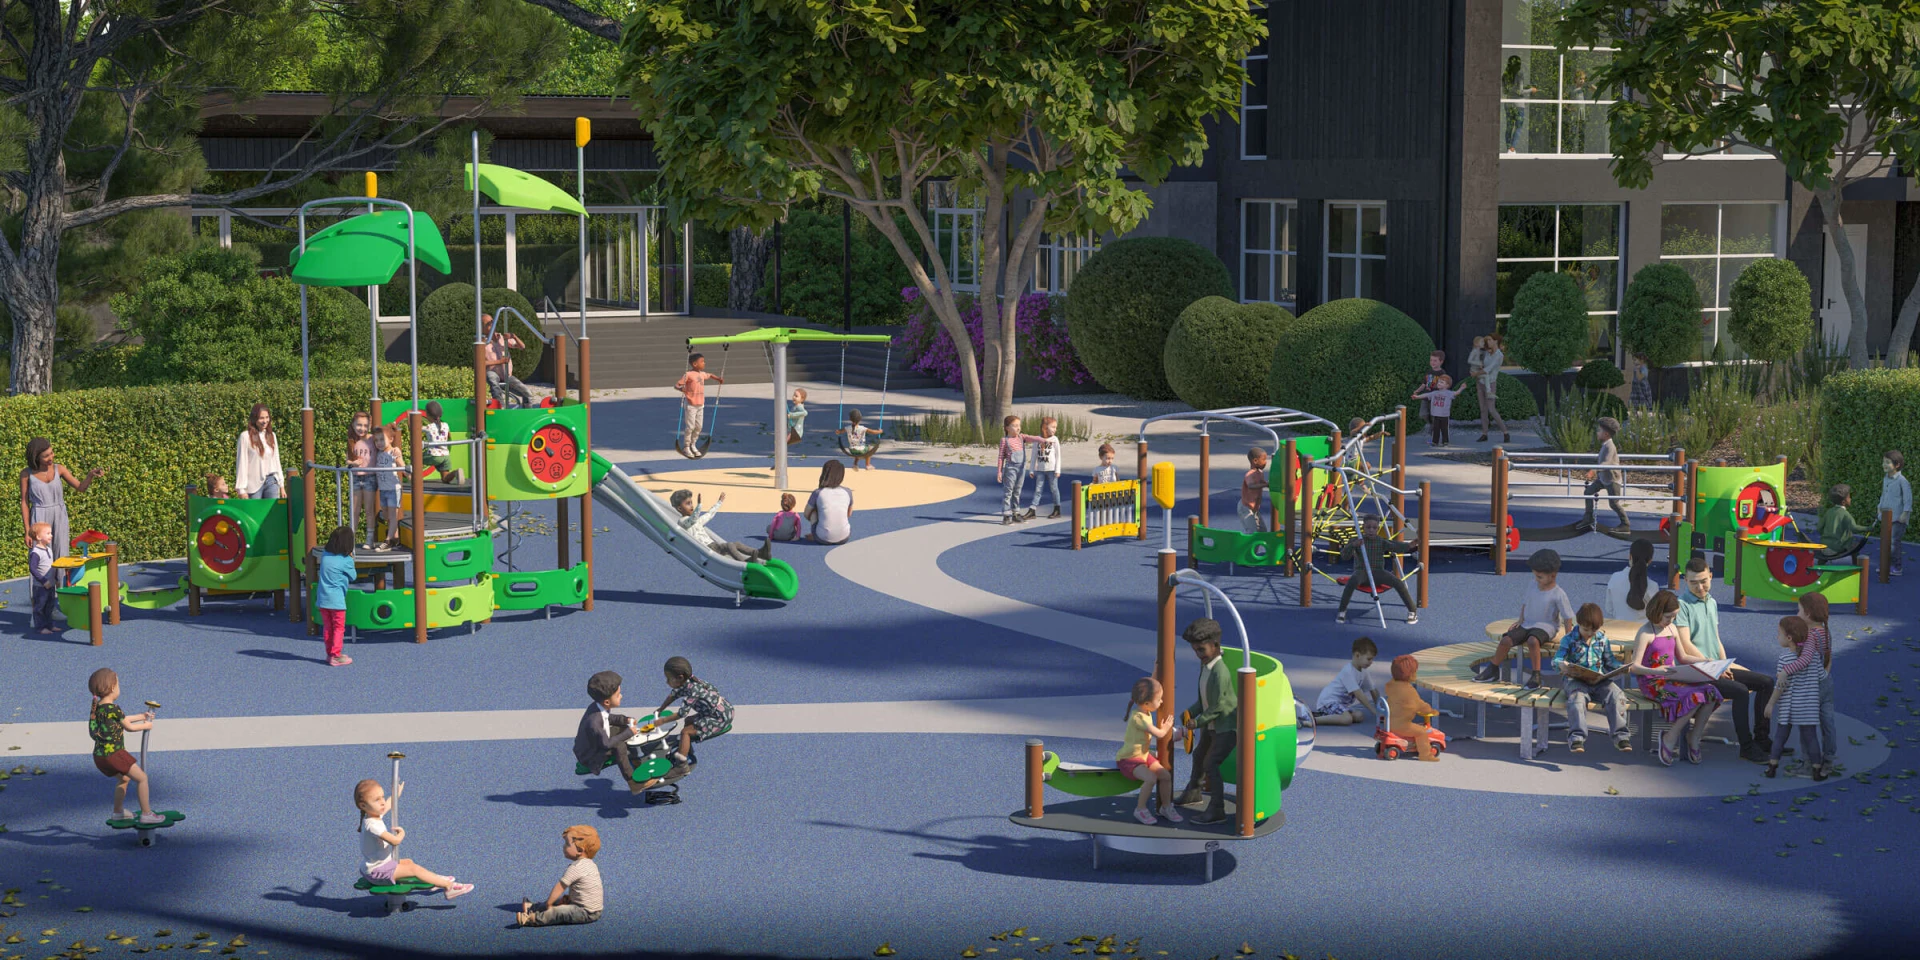 Concept design for a playground with enormous versatility and play activities